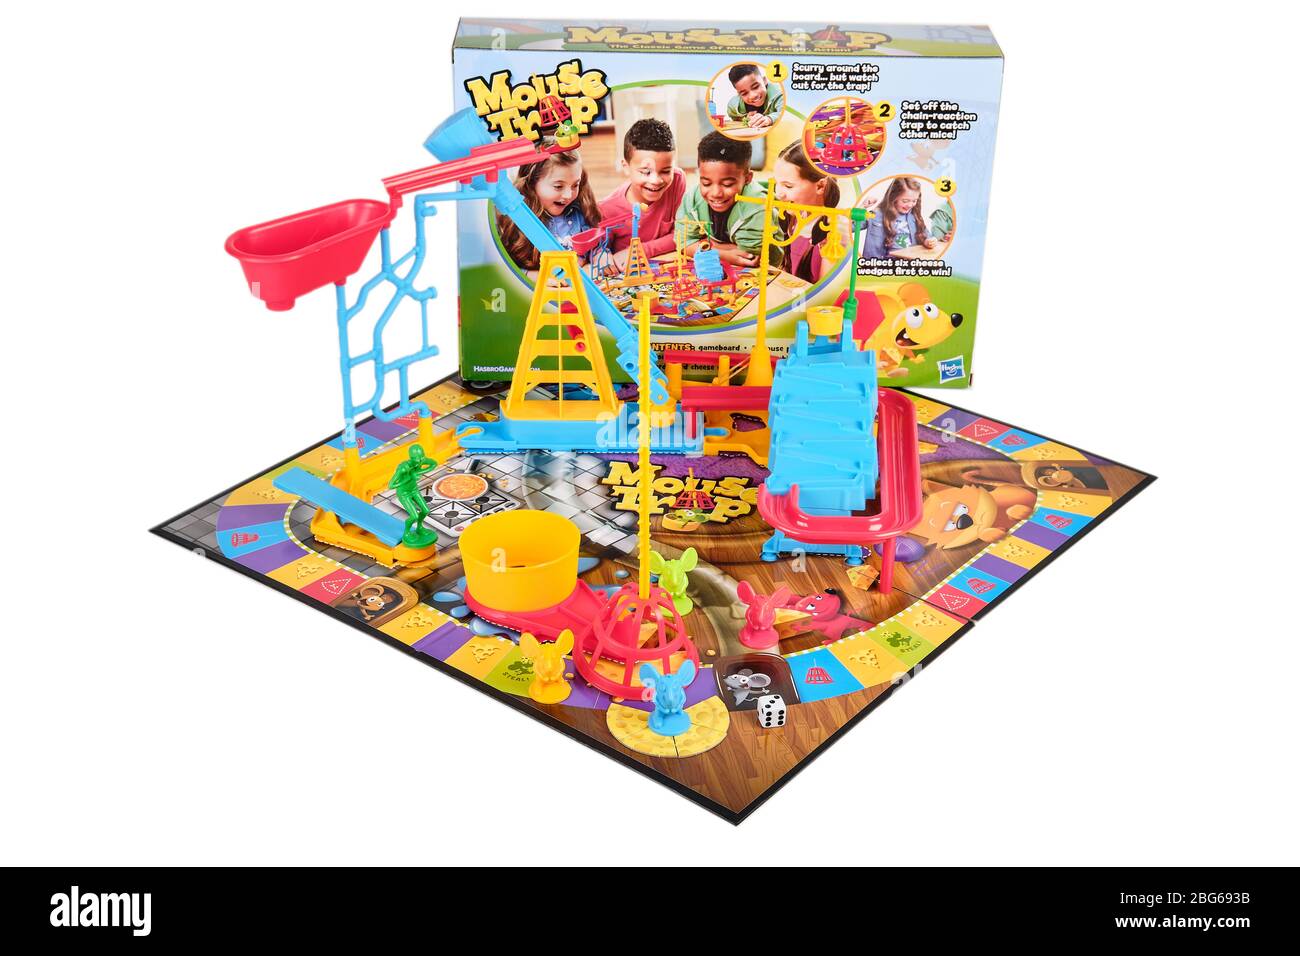 https://c8.alamy.com/comp/2BG693B/close-up-of-back-of-hasbro-mouse-trap-board-game-box-and-assembled-mice-dice-diver-bathtub-broom-cage-cheese-pieces-slide-boot-and-washtub-2BG693B.jpg